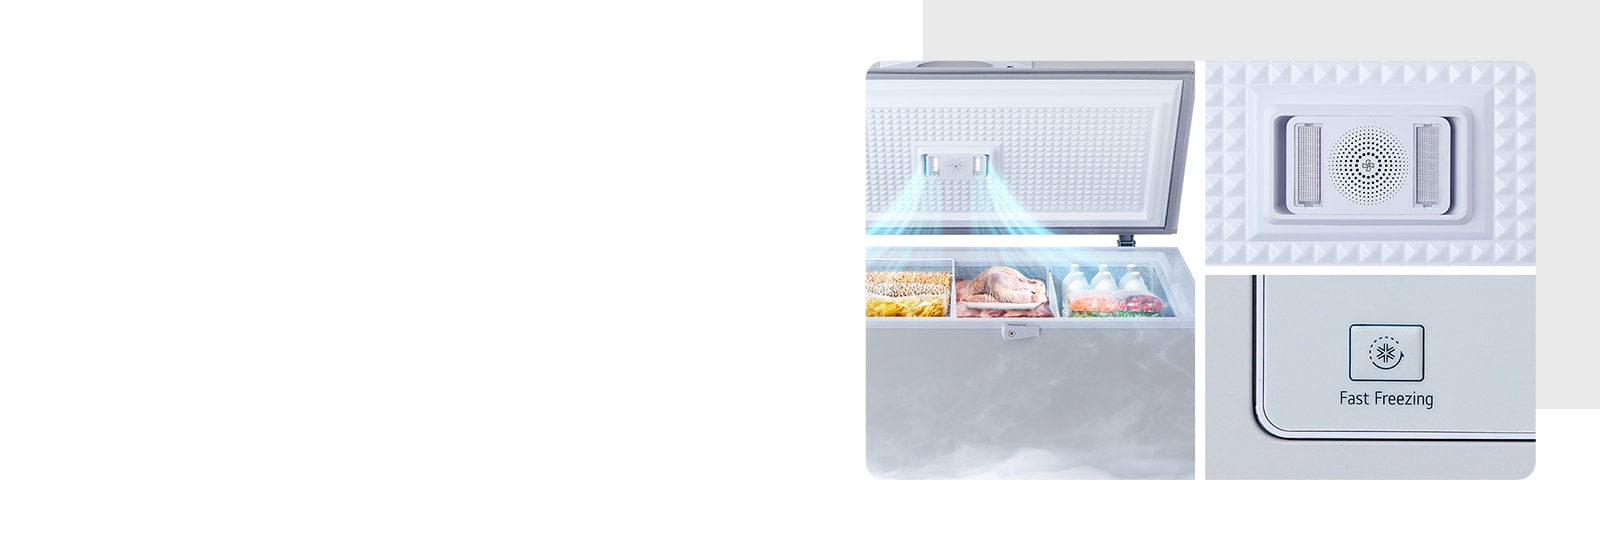 a refrigerator with strong cold air